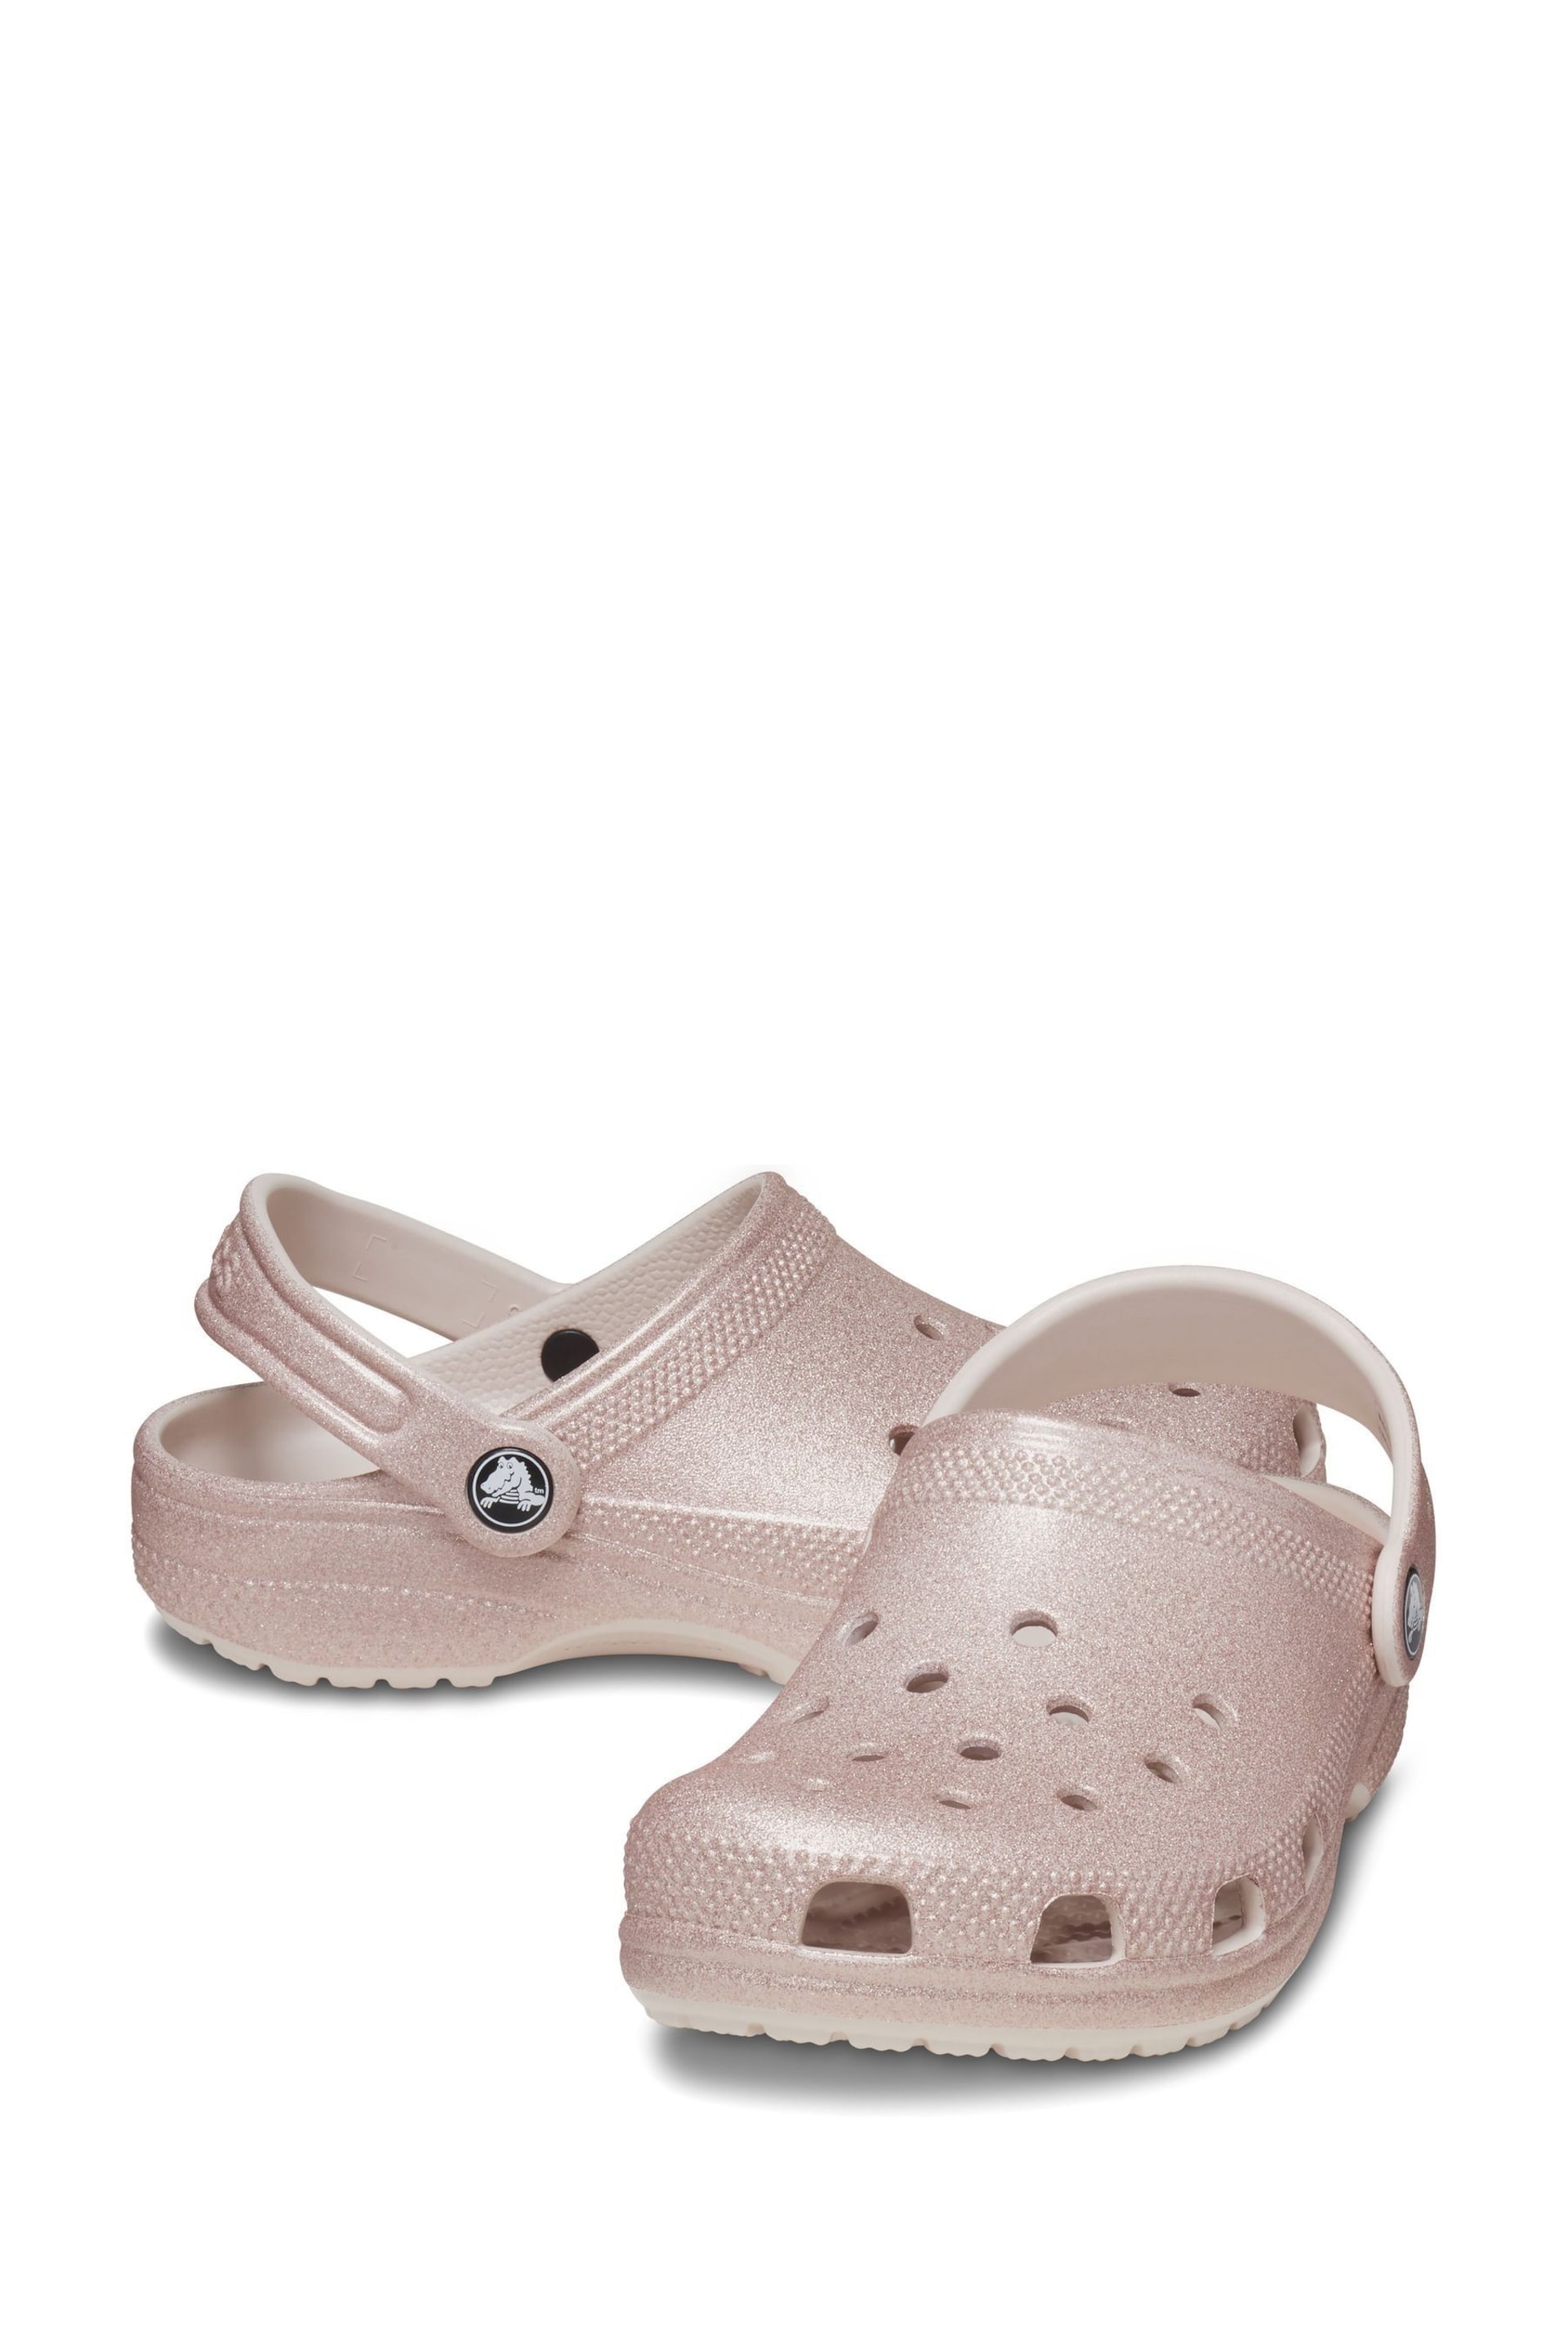 Crocs Classic Toddler Glitter Clogs - Image 4 of 8